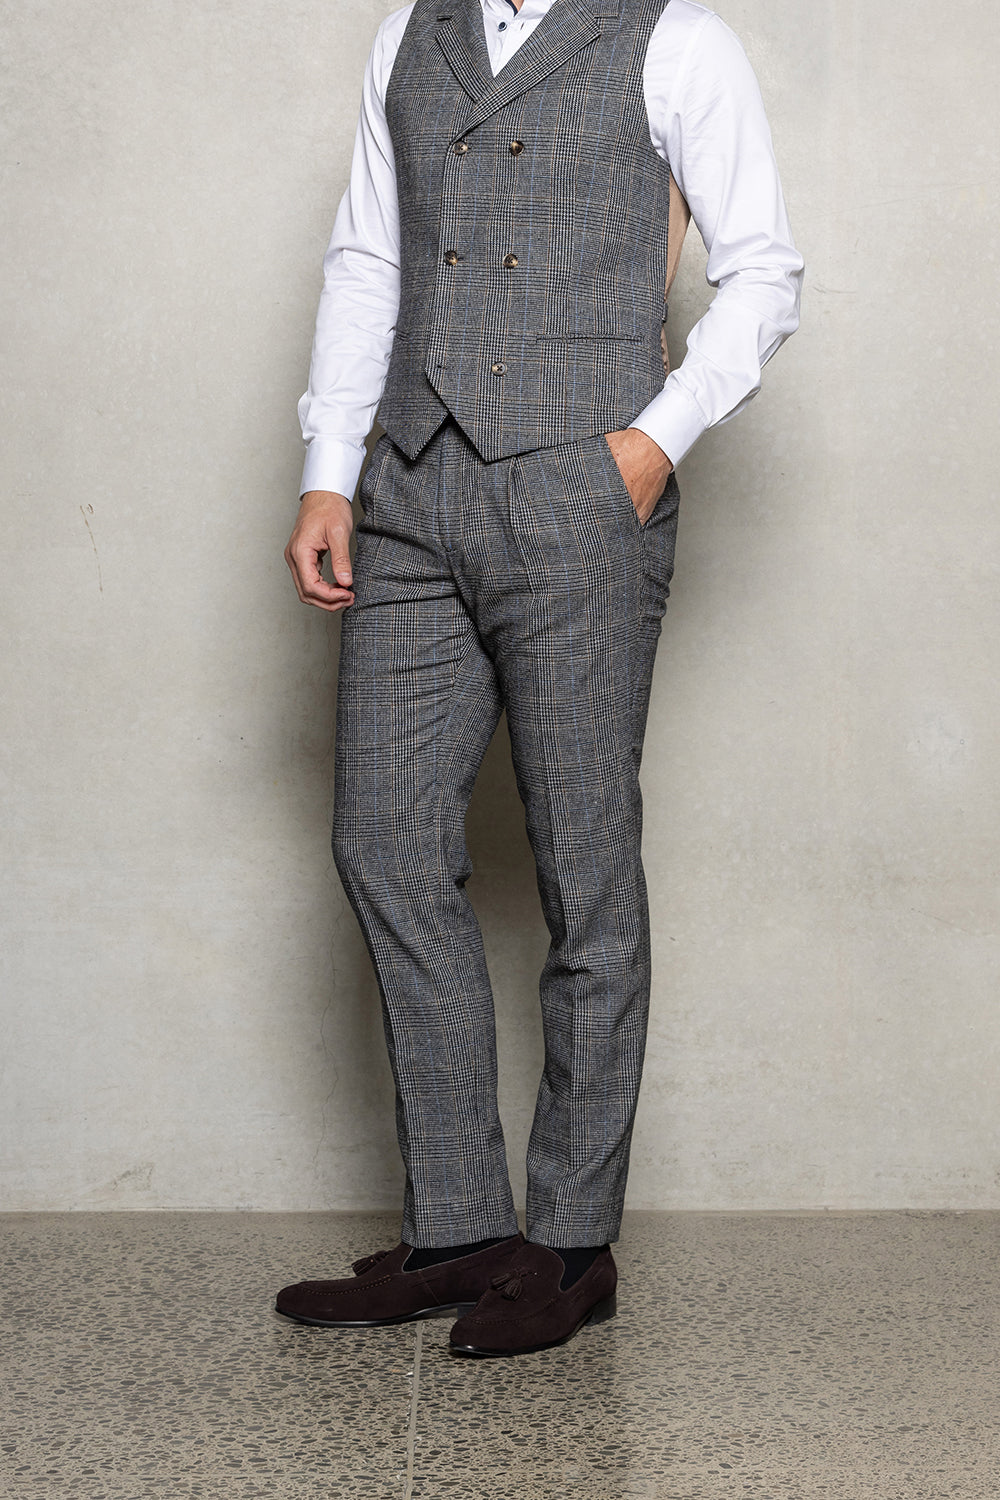 CUTLER & CO CLIVE CHECKED PLEAT TROUSER CW10387